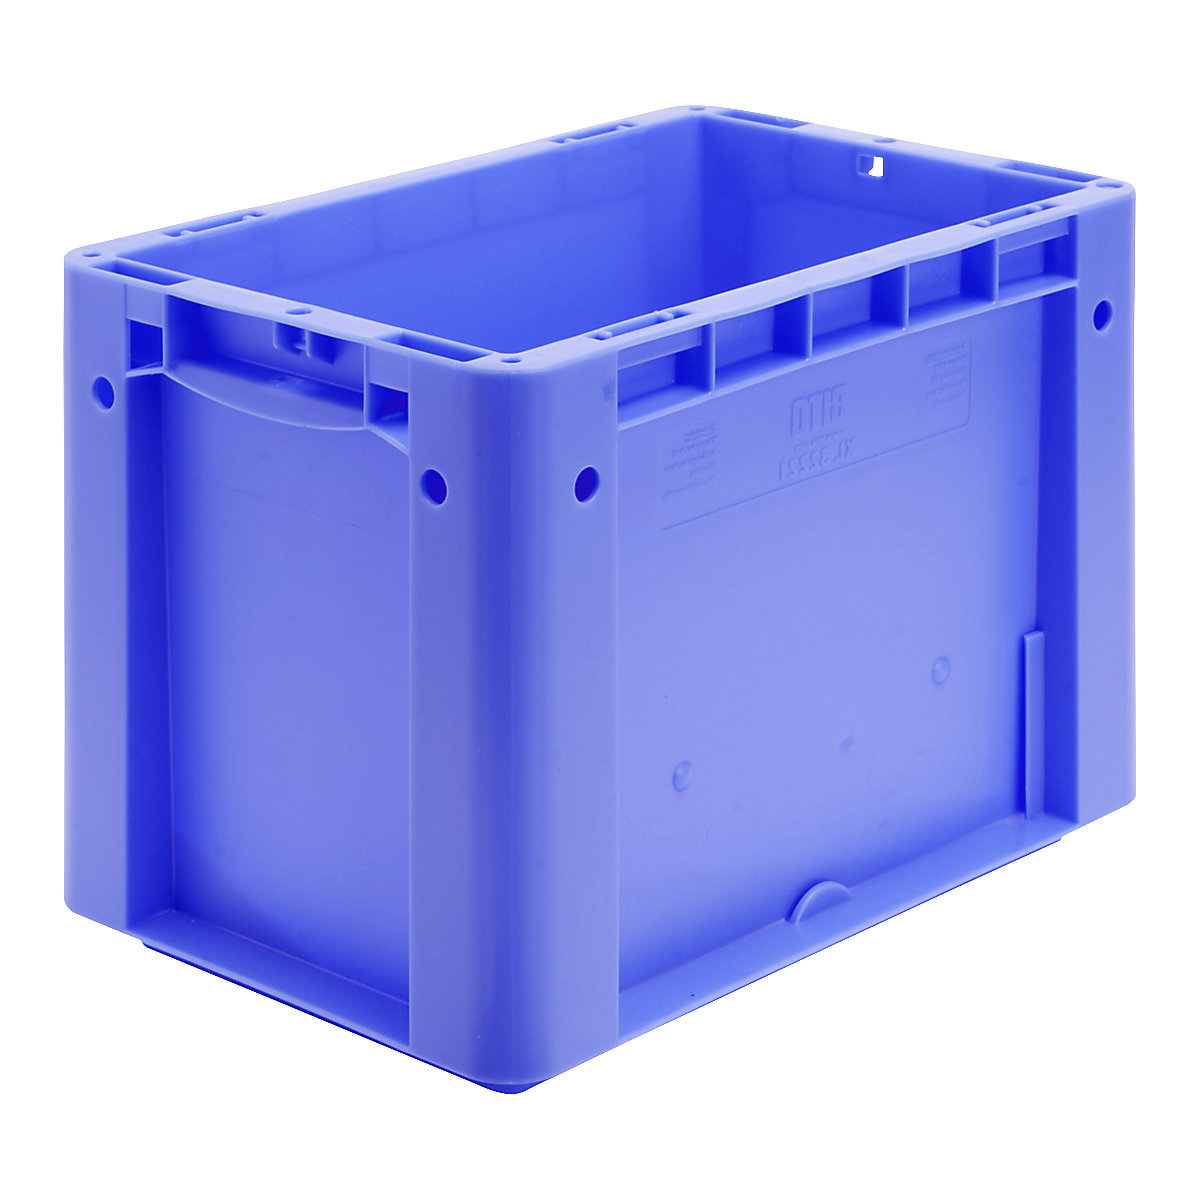 XL Euro stacking container – BITO, standard model, LxWxH 300 x 200 x 220 mm-9